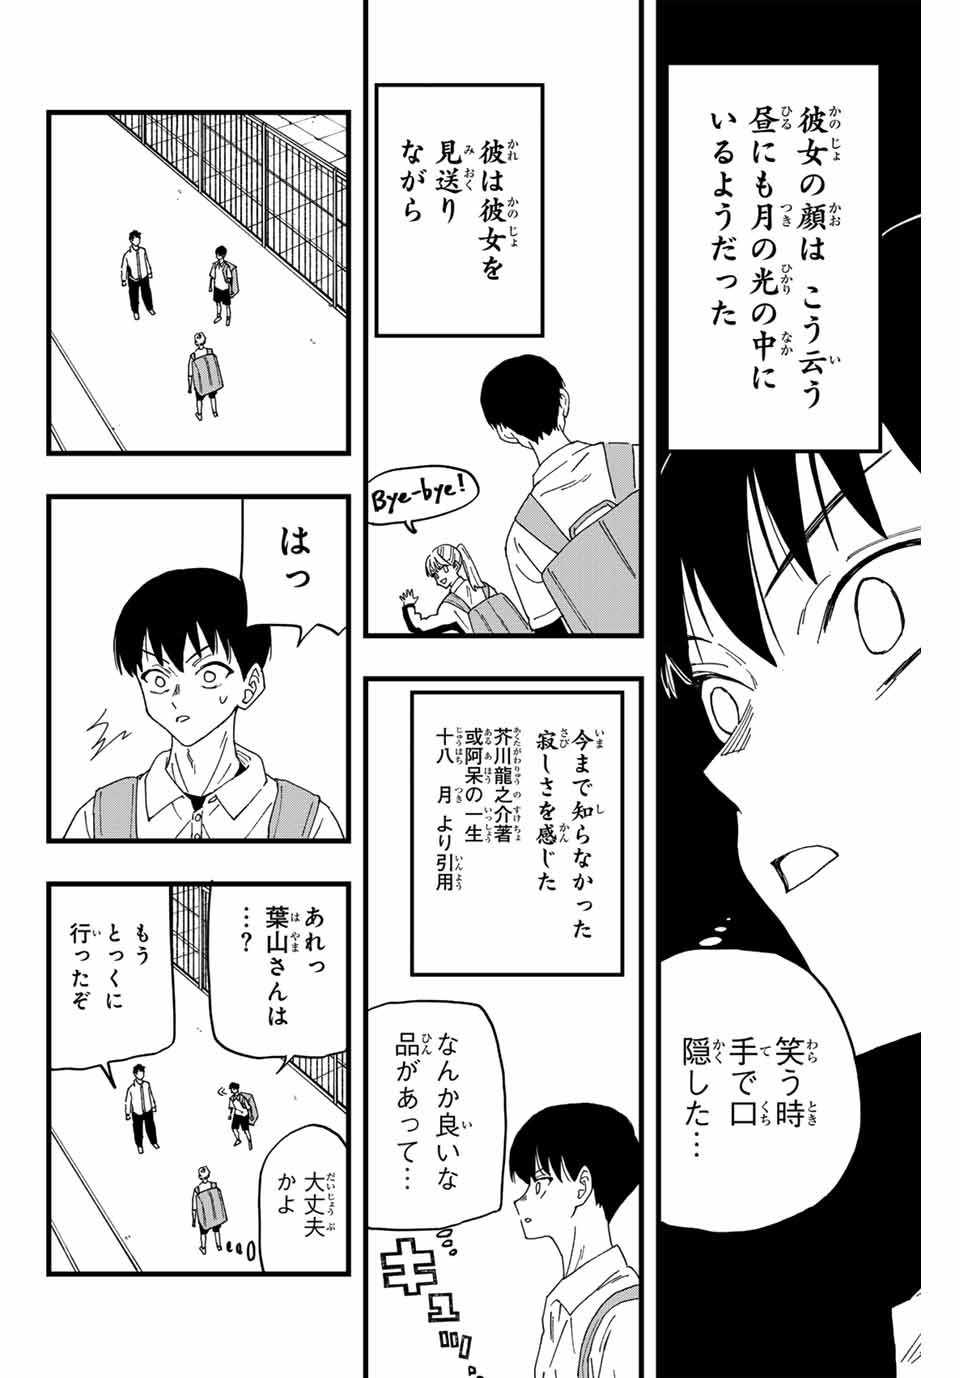 LoVE GAME 第2話 - Page 2